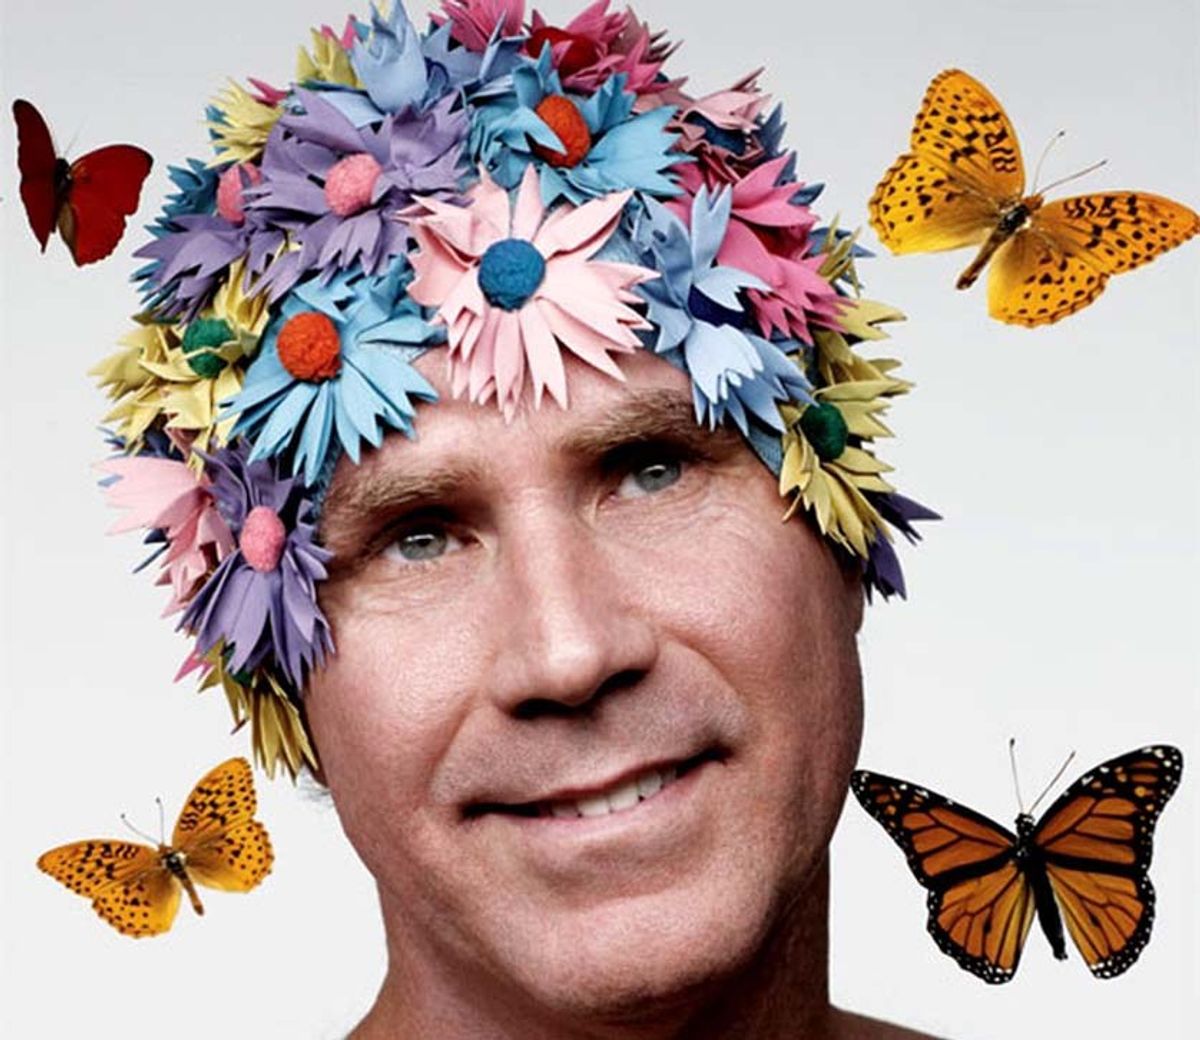 The Definitive Ranking Of The 12 Best Will Ferrell Movie Characters